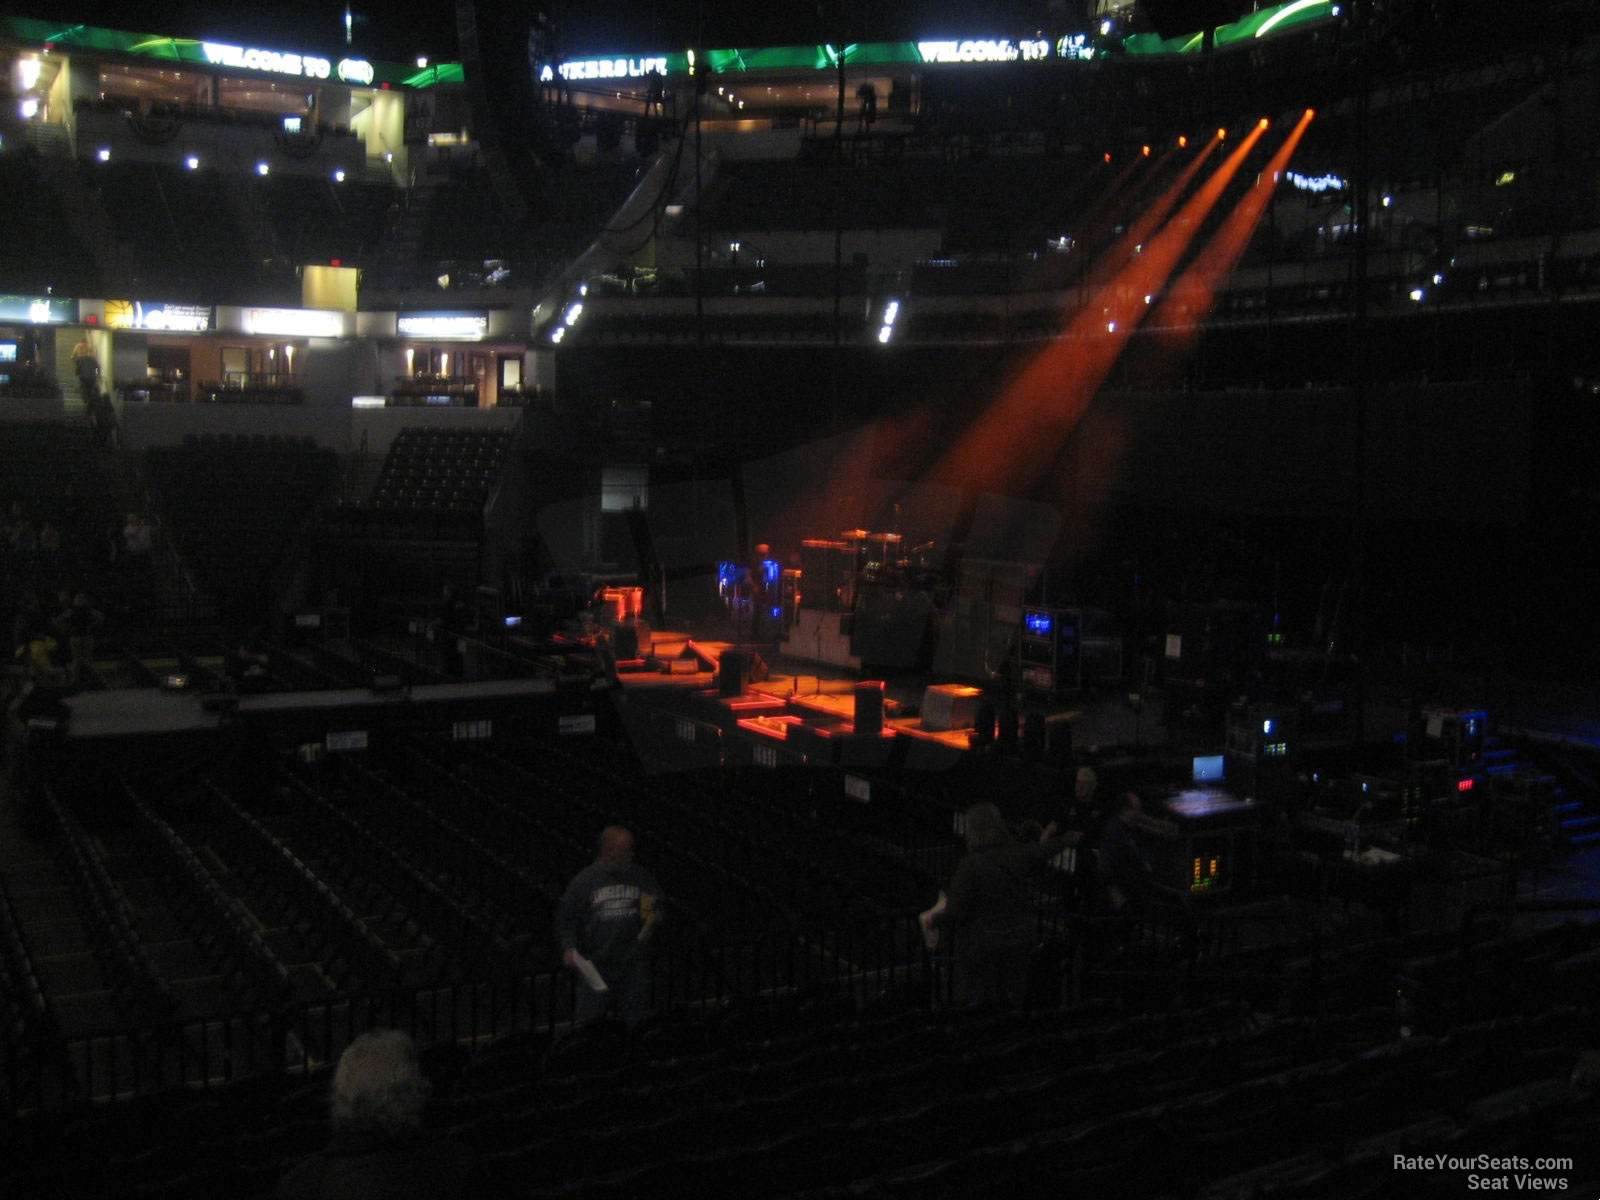 Bankers Life Seating Chart With Seat Numbers